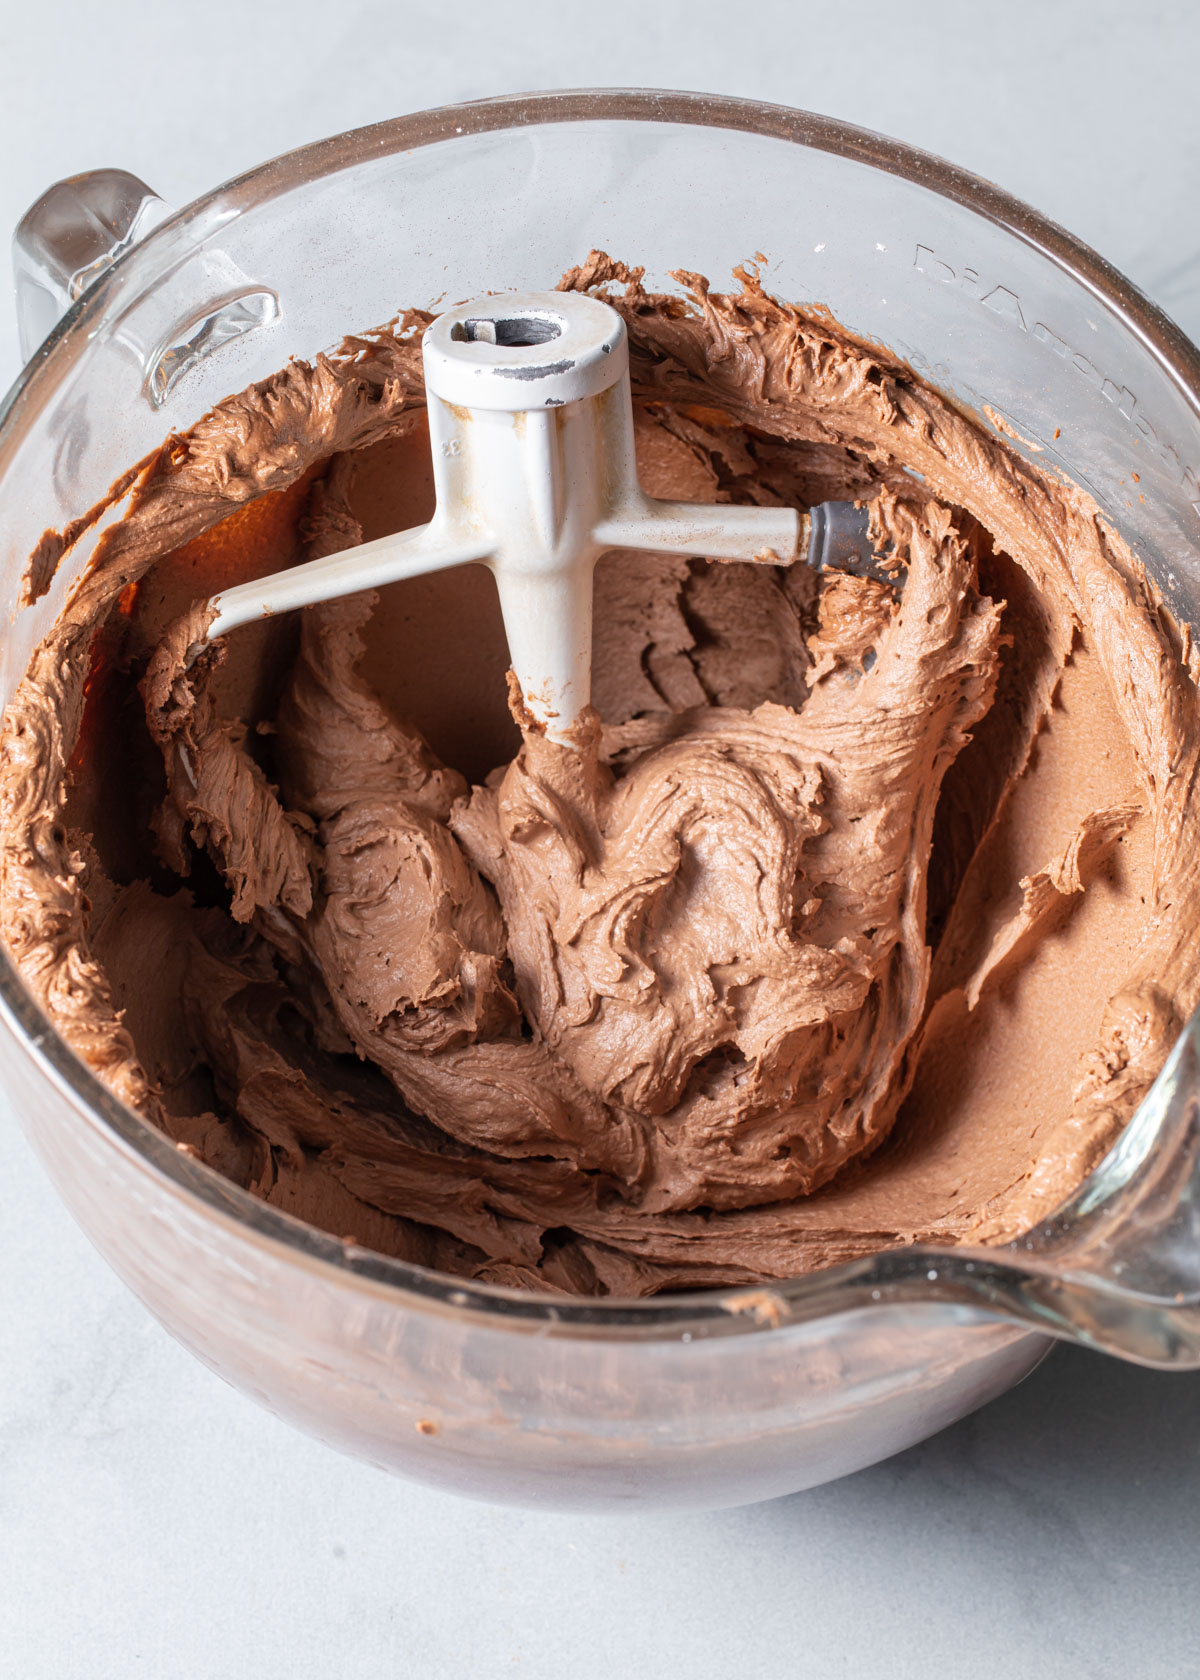 Whipped Nutella buttercream in a glass mixing bowl.